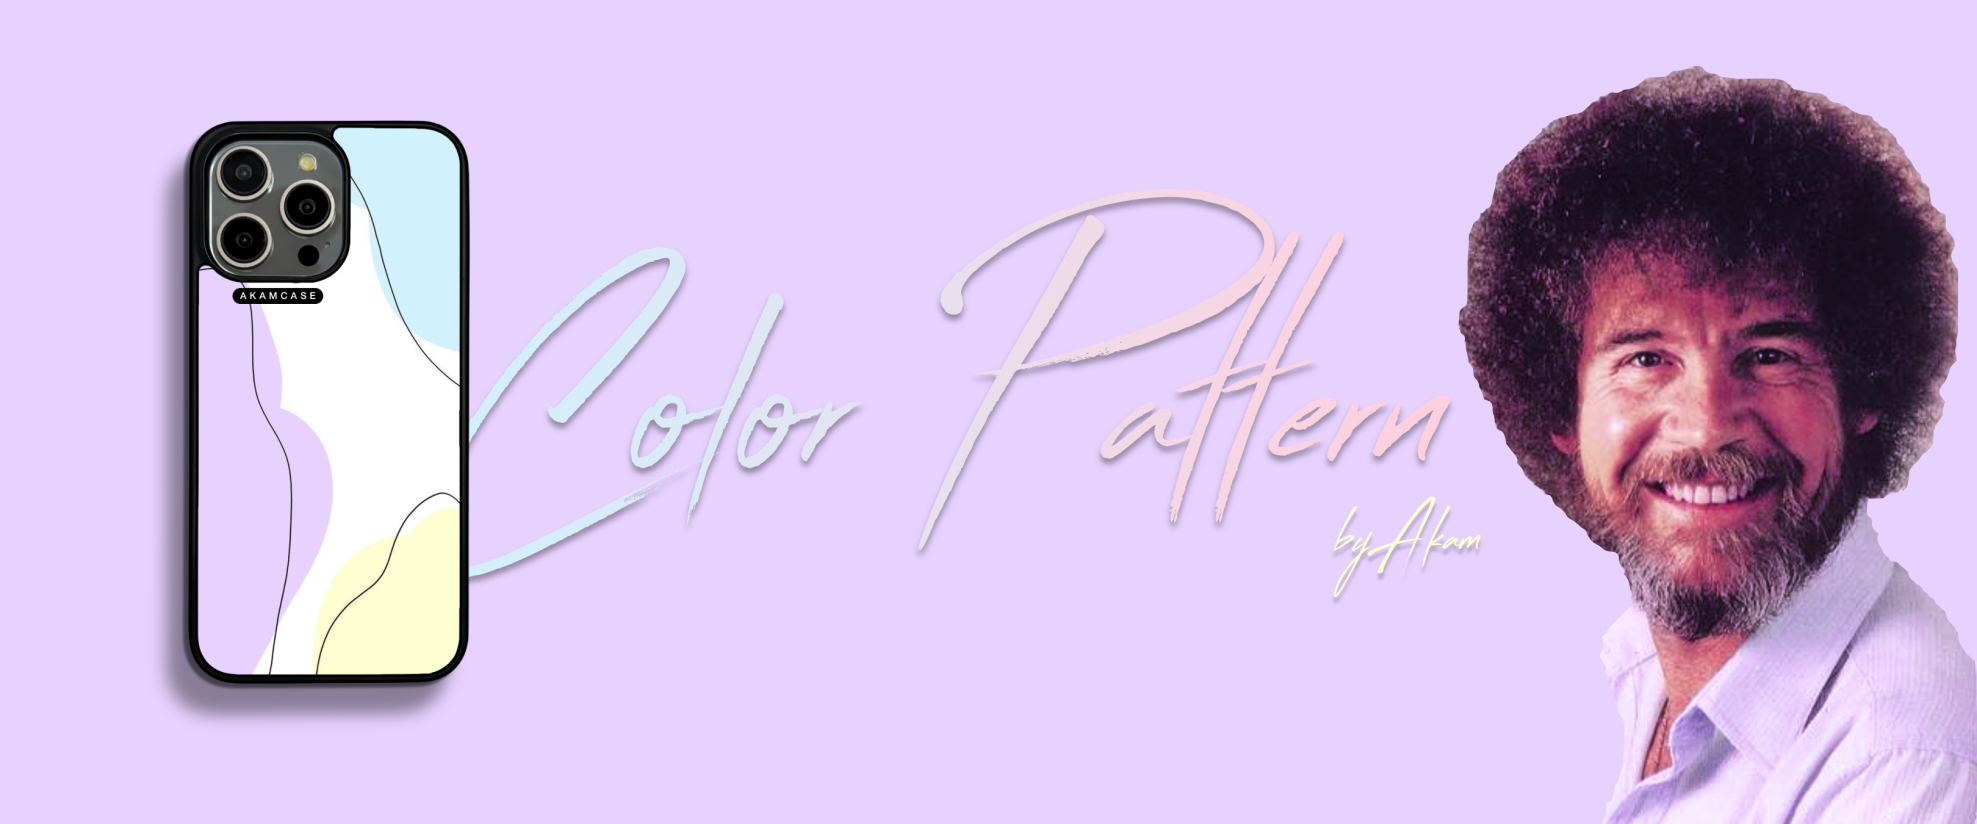 COLOR PATTERN COLLECTION